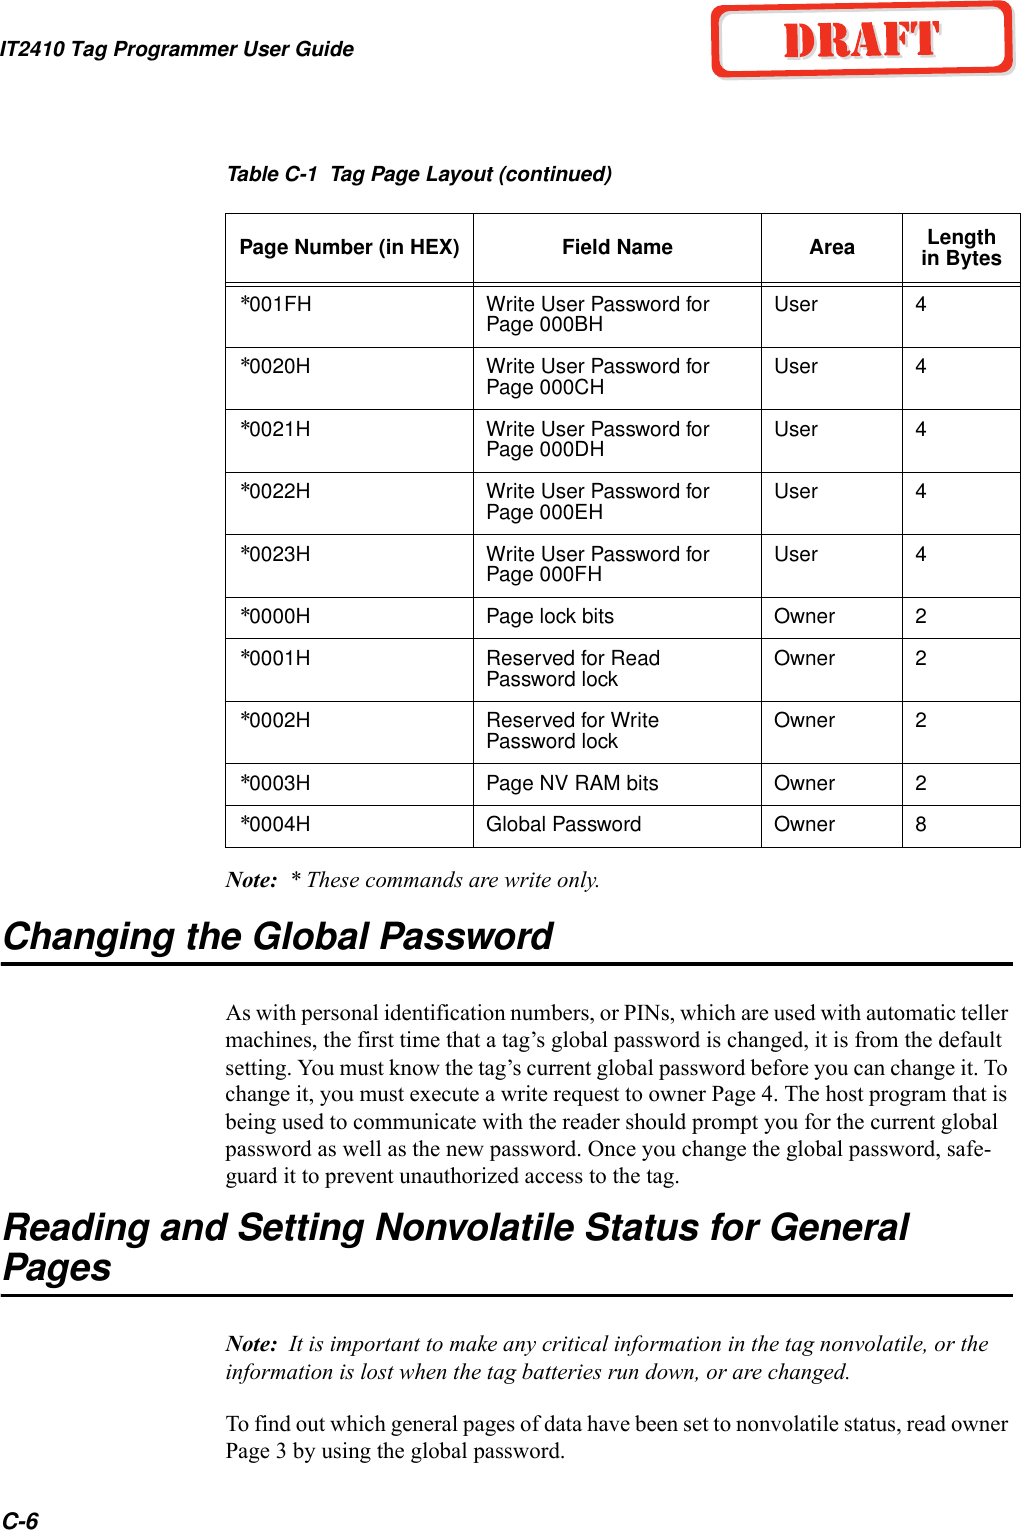 IT2410 Tag Programmer User GuideC-6Note:  * These commands are write only.Changing the Global PasswordAs with personal identification numbers, or PINs, which are used with automatic teller machines, the first time that a tag’s global password is changed, it is from the default setting. You must know the tag’s current global password before you can change it. To change it, you must execute a write request to owner Page 4. The host program that is being used to communicate with the reader should prompt you for the current global password as well as the new password. Once you change the global password, safe-guard it to prevent unauthorized access to the tag.Reading and Setting Nonvolatile Status for General PagesNote:  It is important to make any critical information in the tag nonvolatile, or the information is lost when the tag batteries run down, or are changed. To find out which general pages of data have been set to nonvolatile status, read owner Page 3 by using the global password. *001FH Write User Password for Page 000BH User 4*0020H Write User Password for Page 000CH User 4*0021H Write User Password for Page 000DH User 4*0022H Write User Password for Page 000EH User 4*0023H Write User Password for Page 000FH User 4*0000H Page lock bits Owner 2*0001H Reserved for Read Password lock Owner 2*0002H Reserved for Write Password lock Owner 2*0003H Page NV RAM bits Owner 2*0004H Global Password Owner 8Table C-1  Tag Page Layout (continued)Page Number (in HEX) Field Name Area Length in Bytes